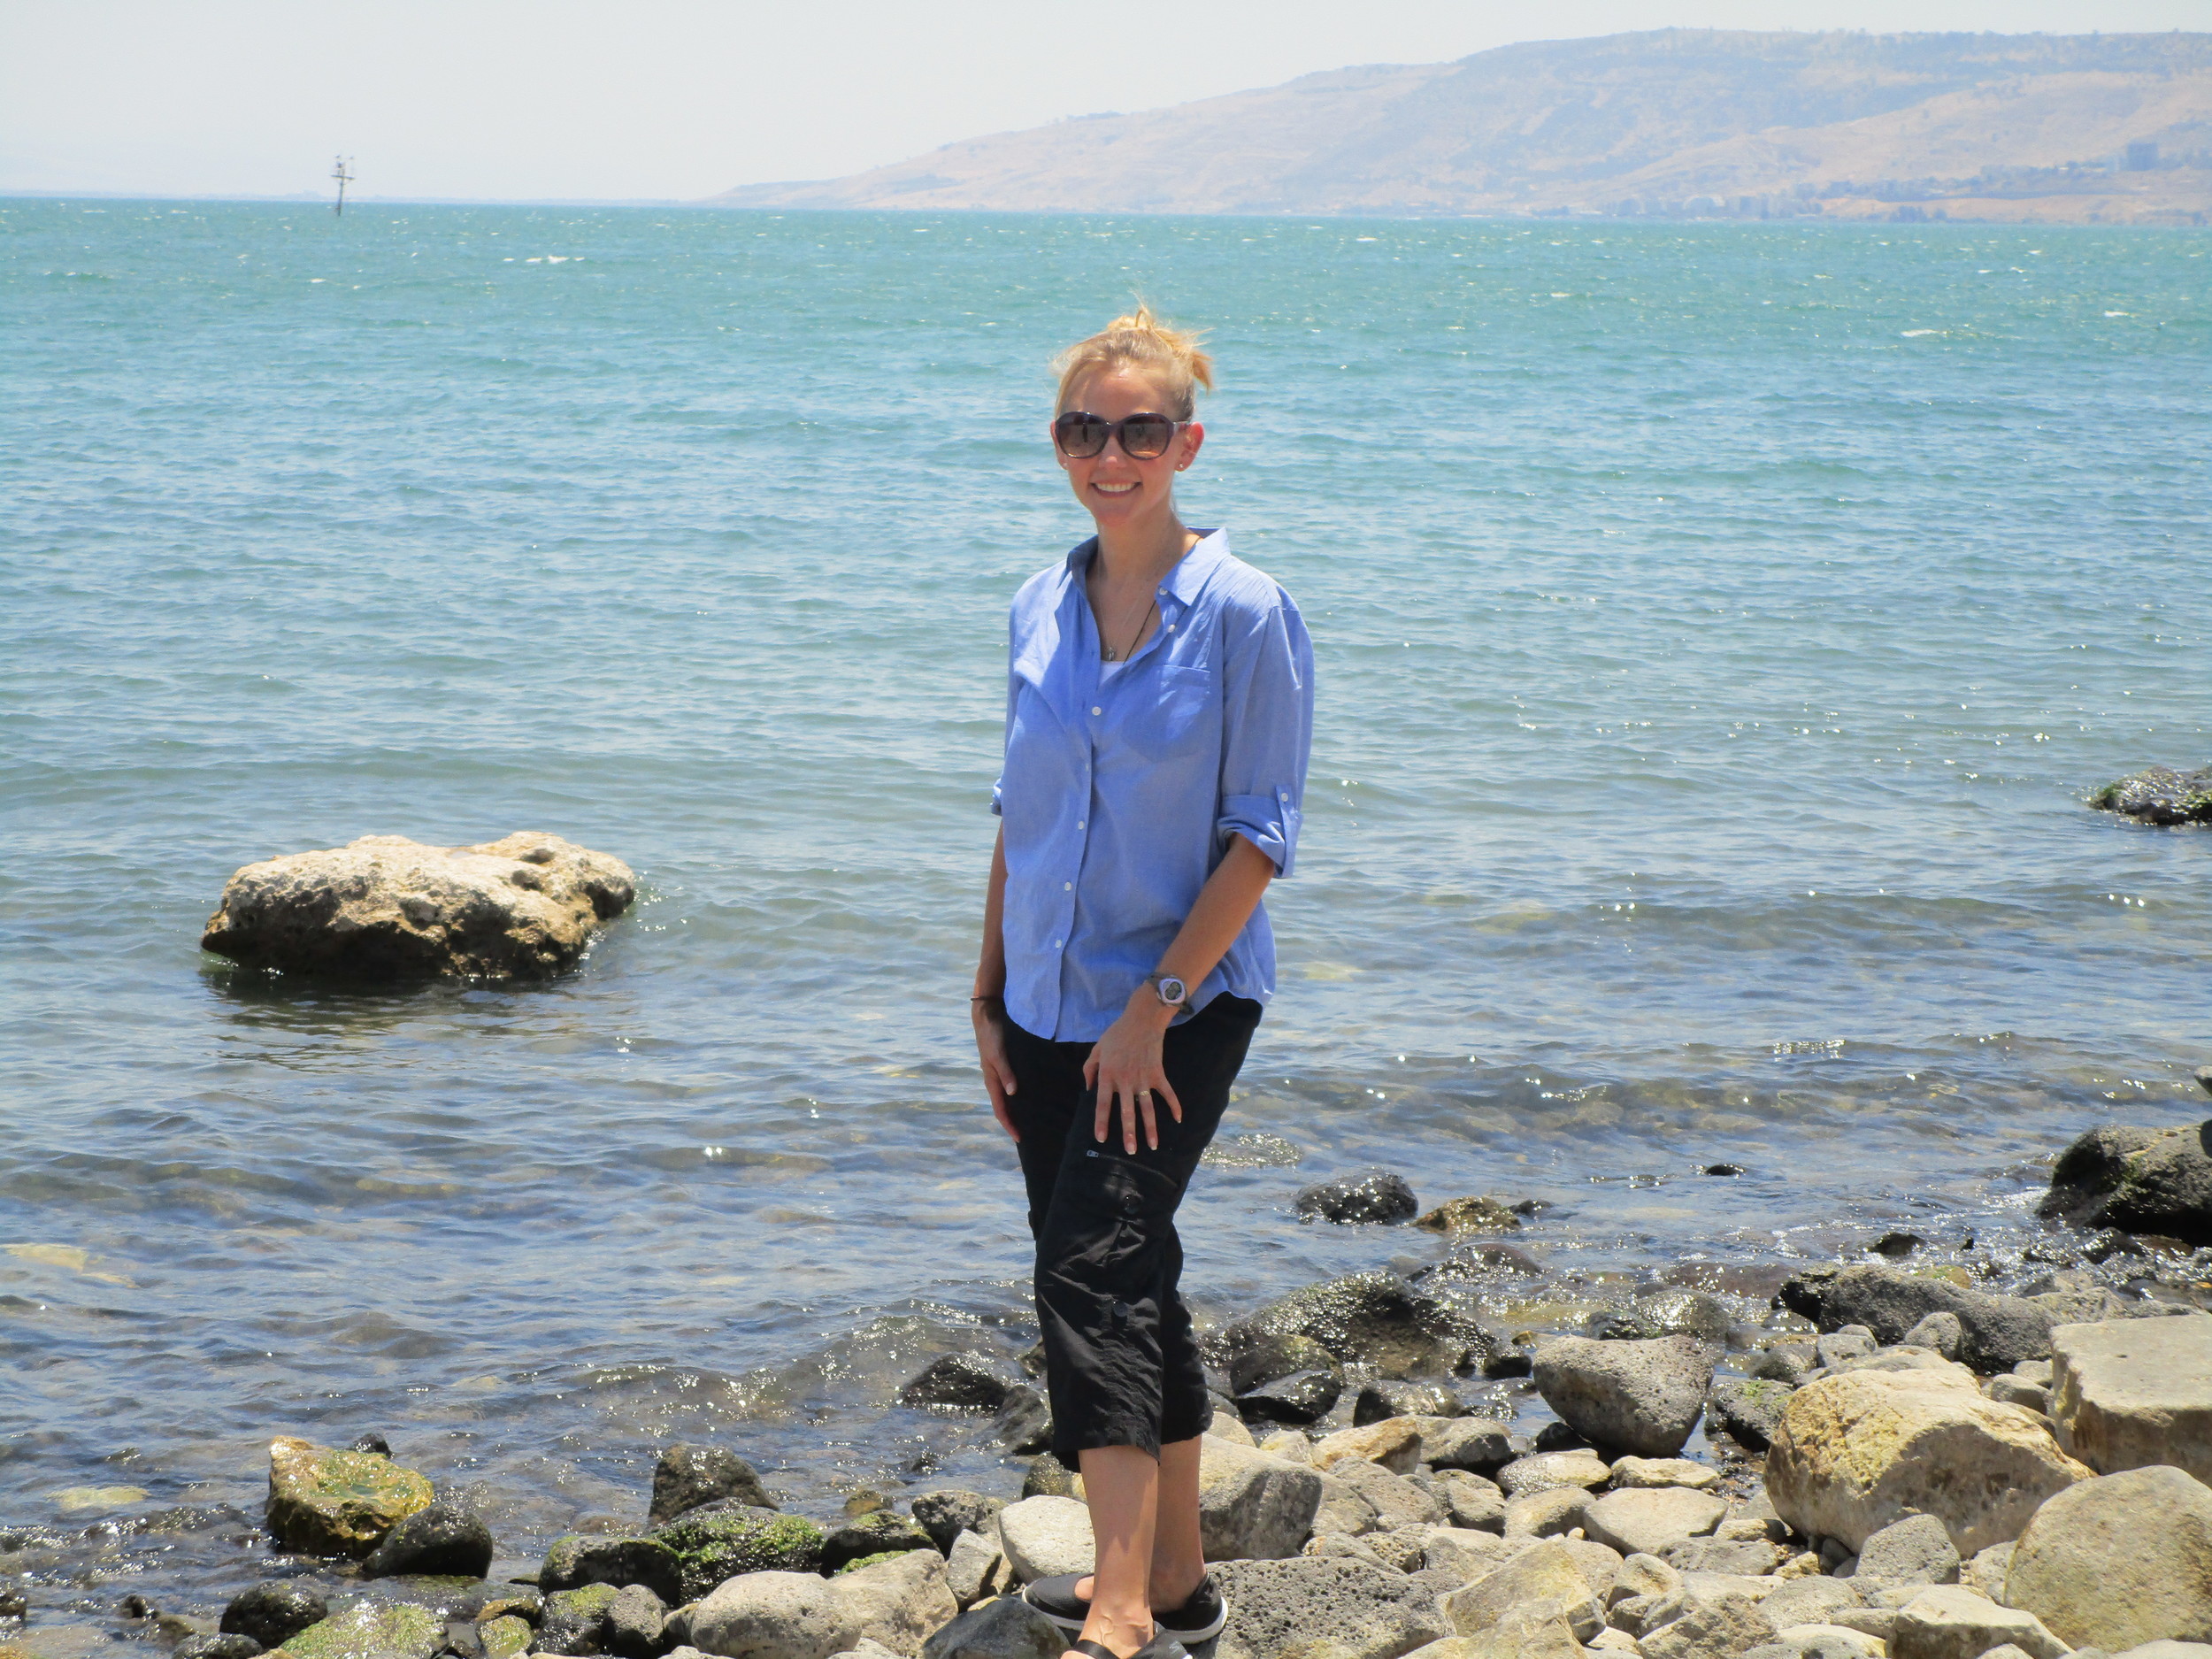  The moment Letta's feet touched the water in the Sea of Galilee. 